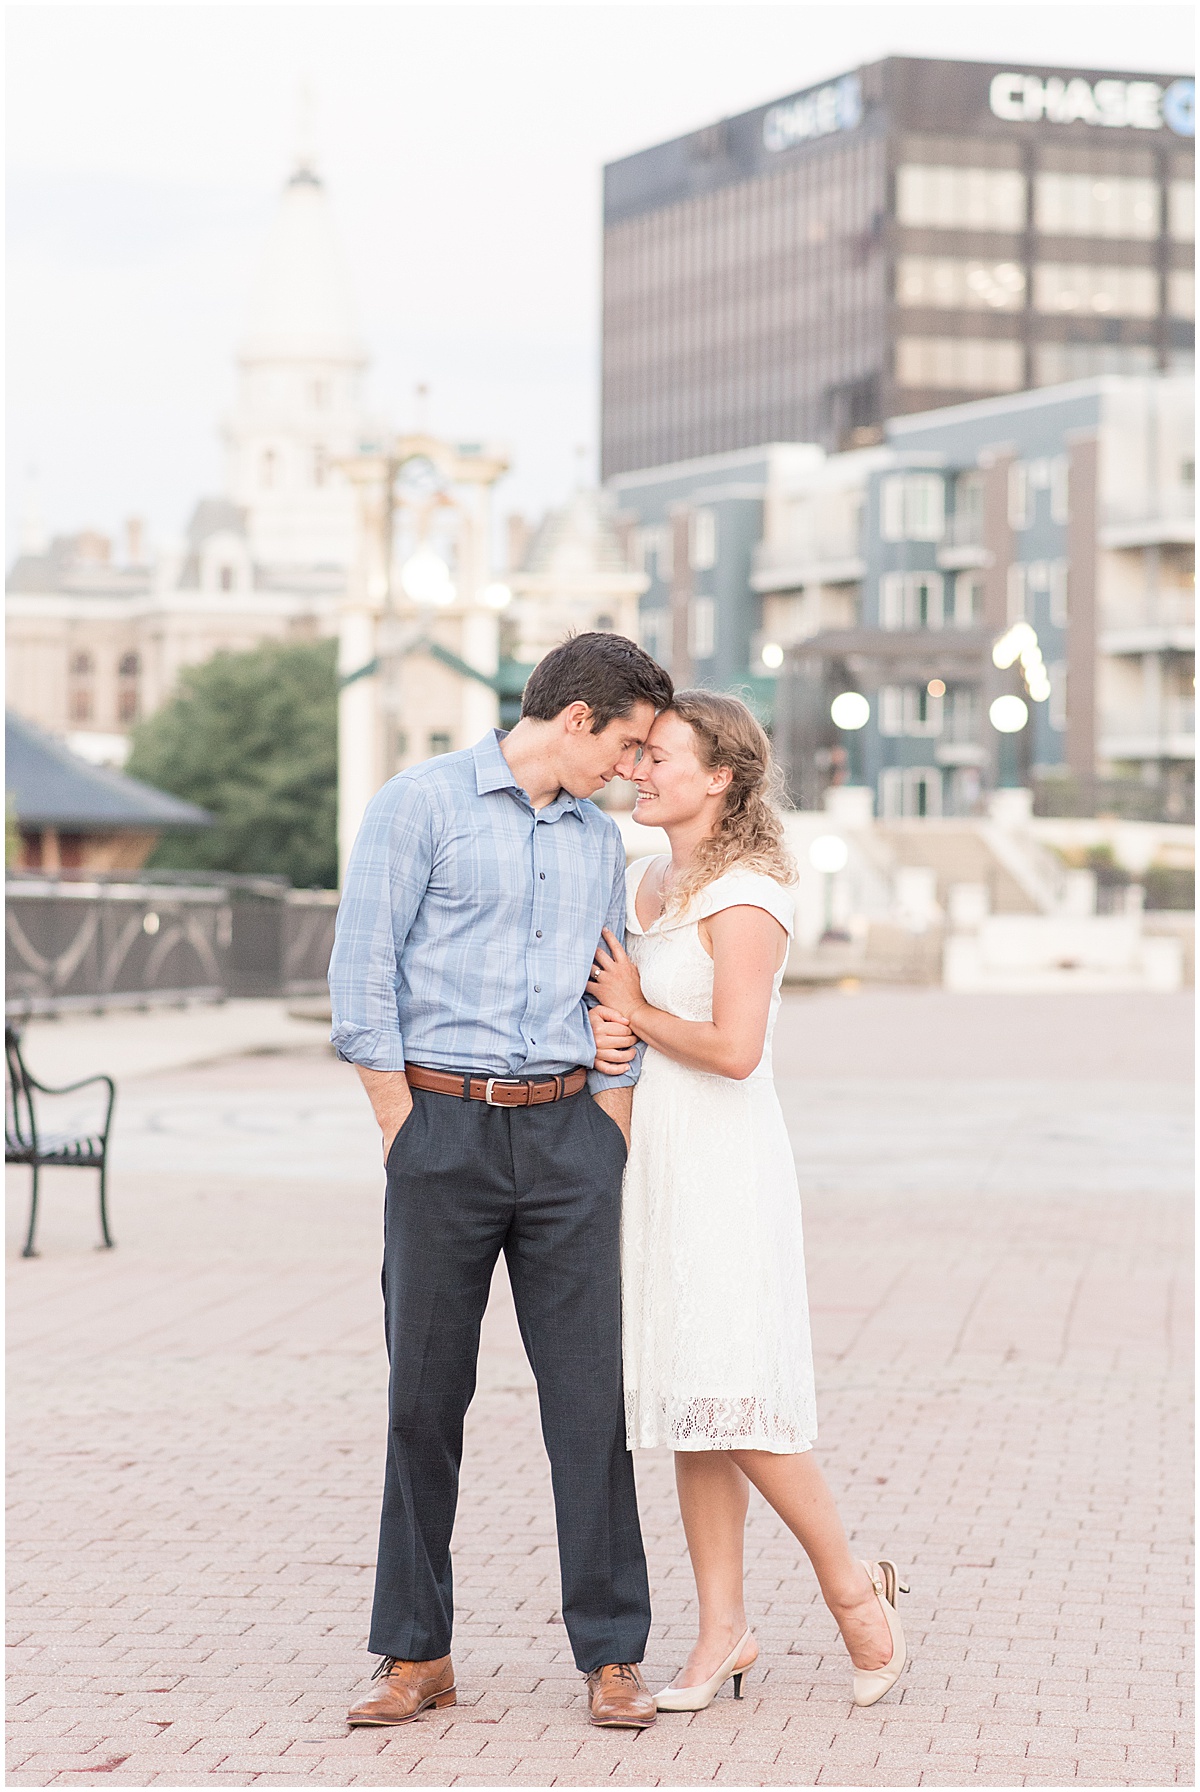 Andrew Mahoney and Julie Feldpausch opted for summer engagement photos in downtown Lafayette, Indiana